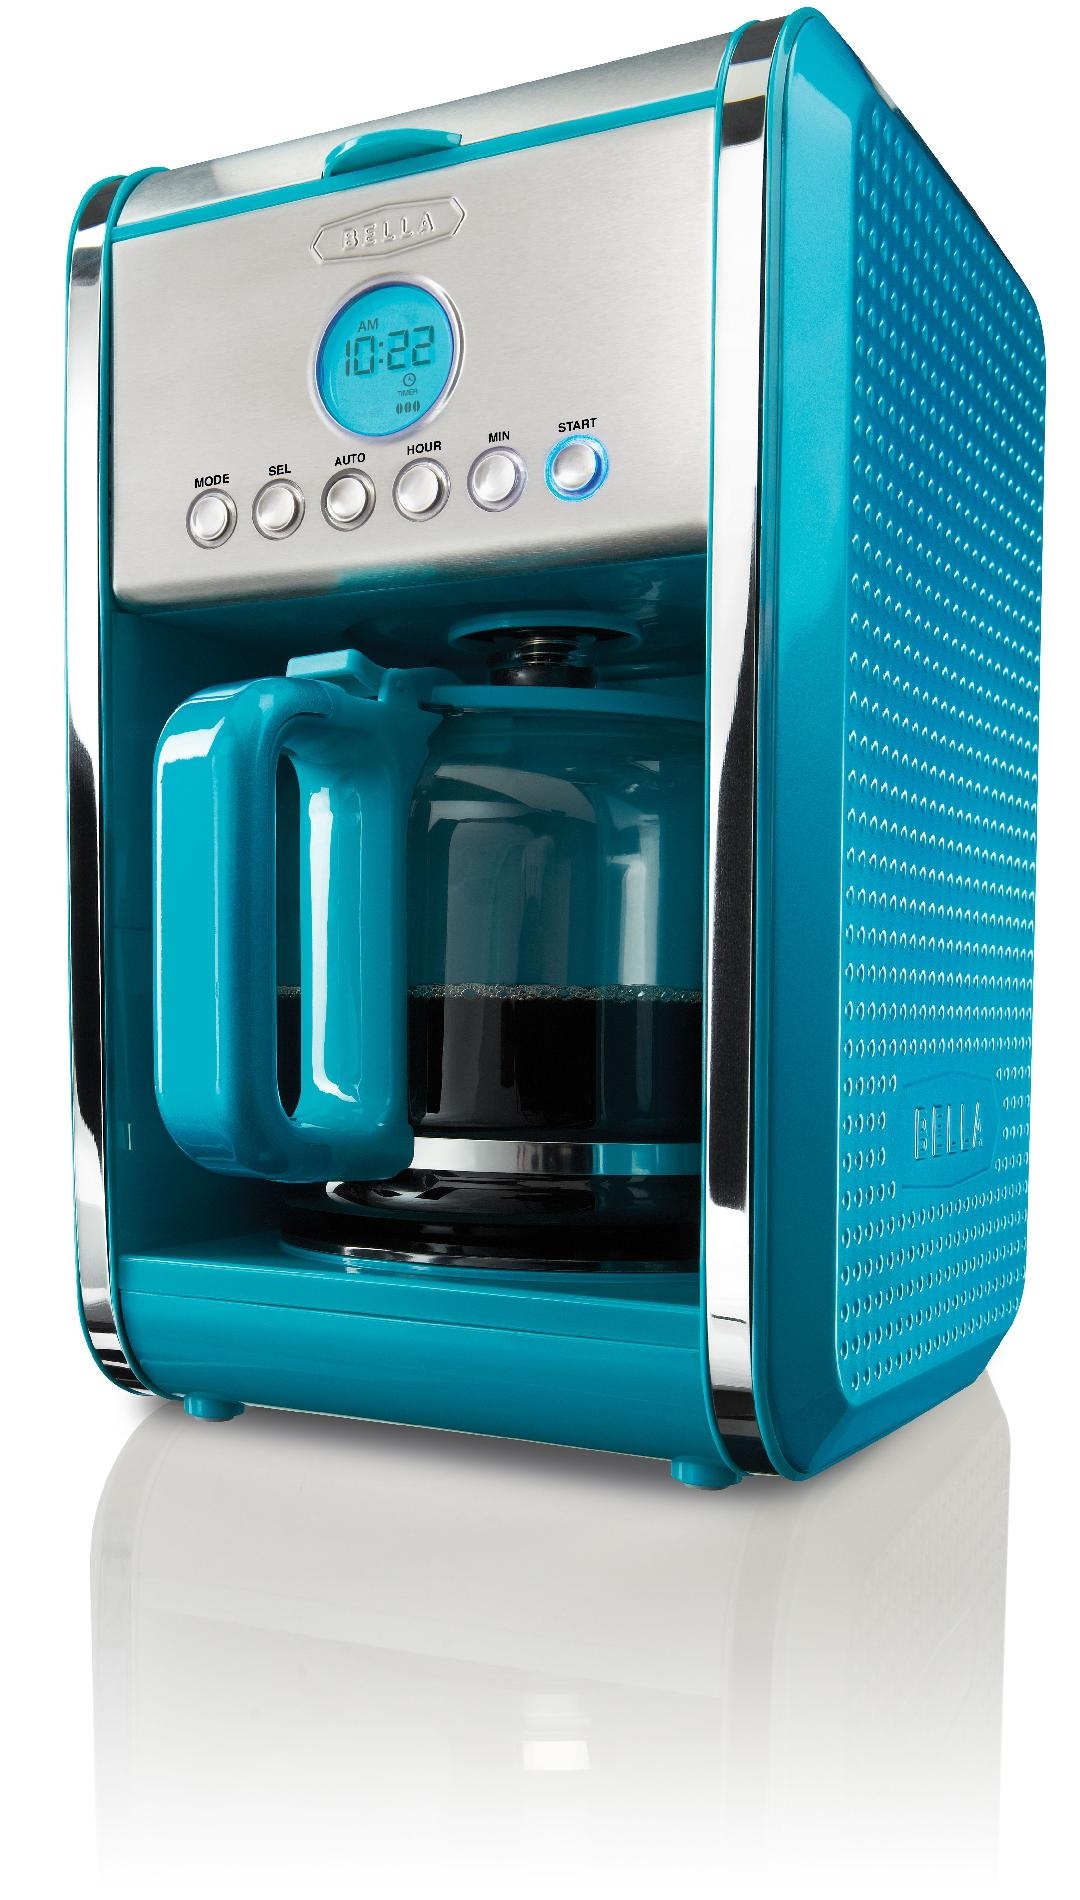 Colored coffee makers